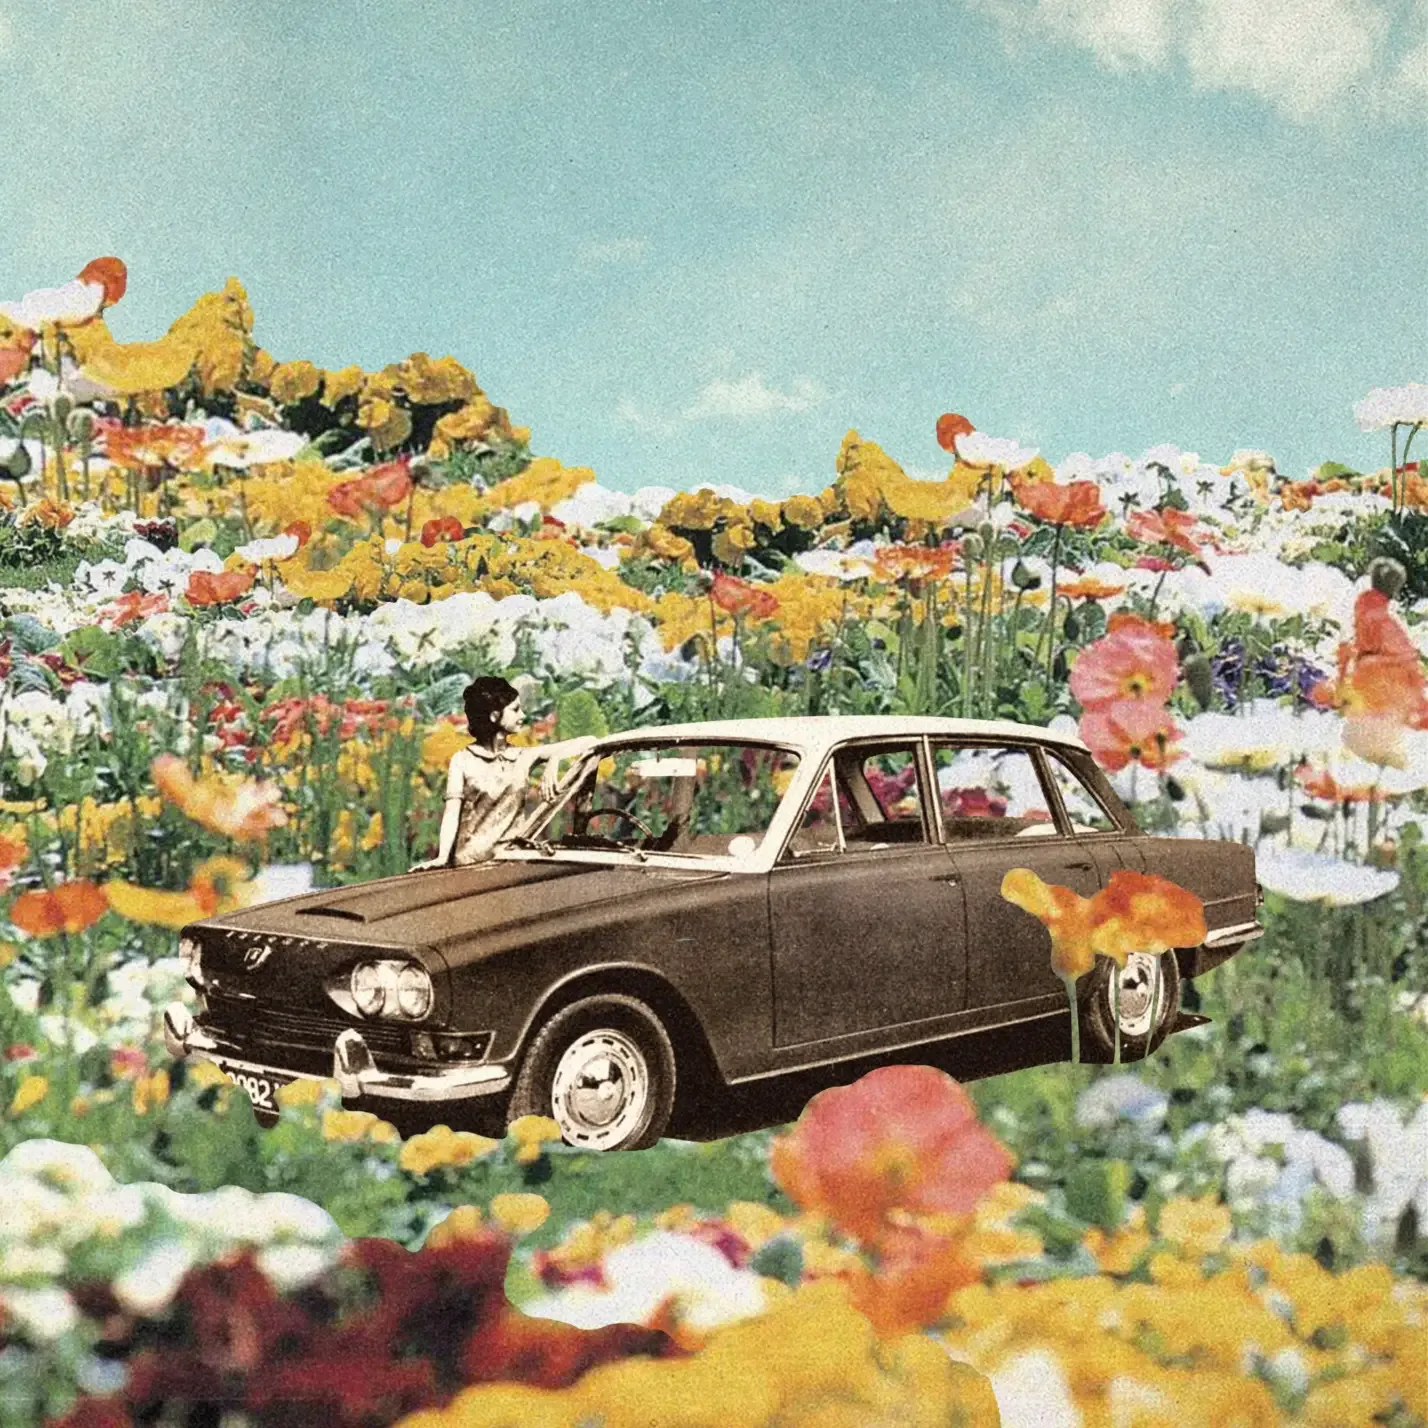 Artwork by Cover Art Guy showing a vintage black-and-white car with a woman next to it amid colorful flowers